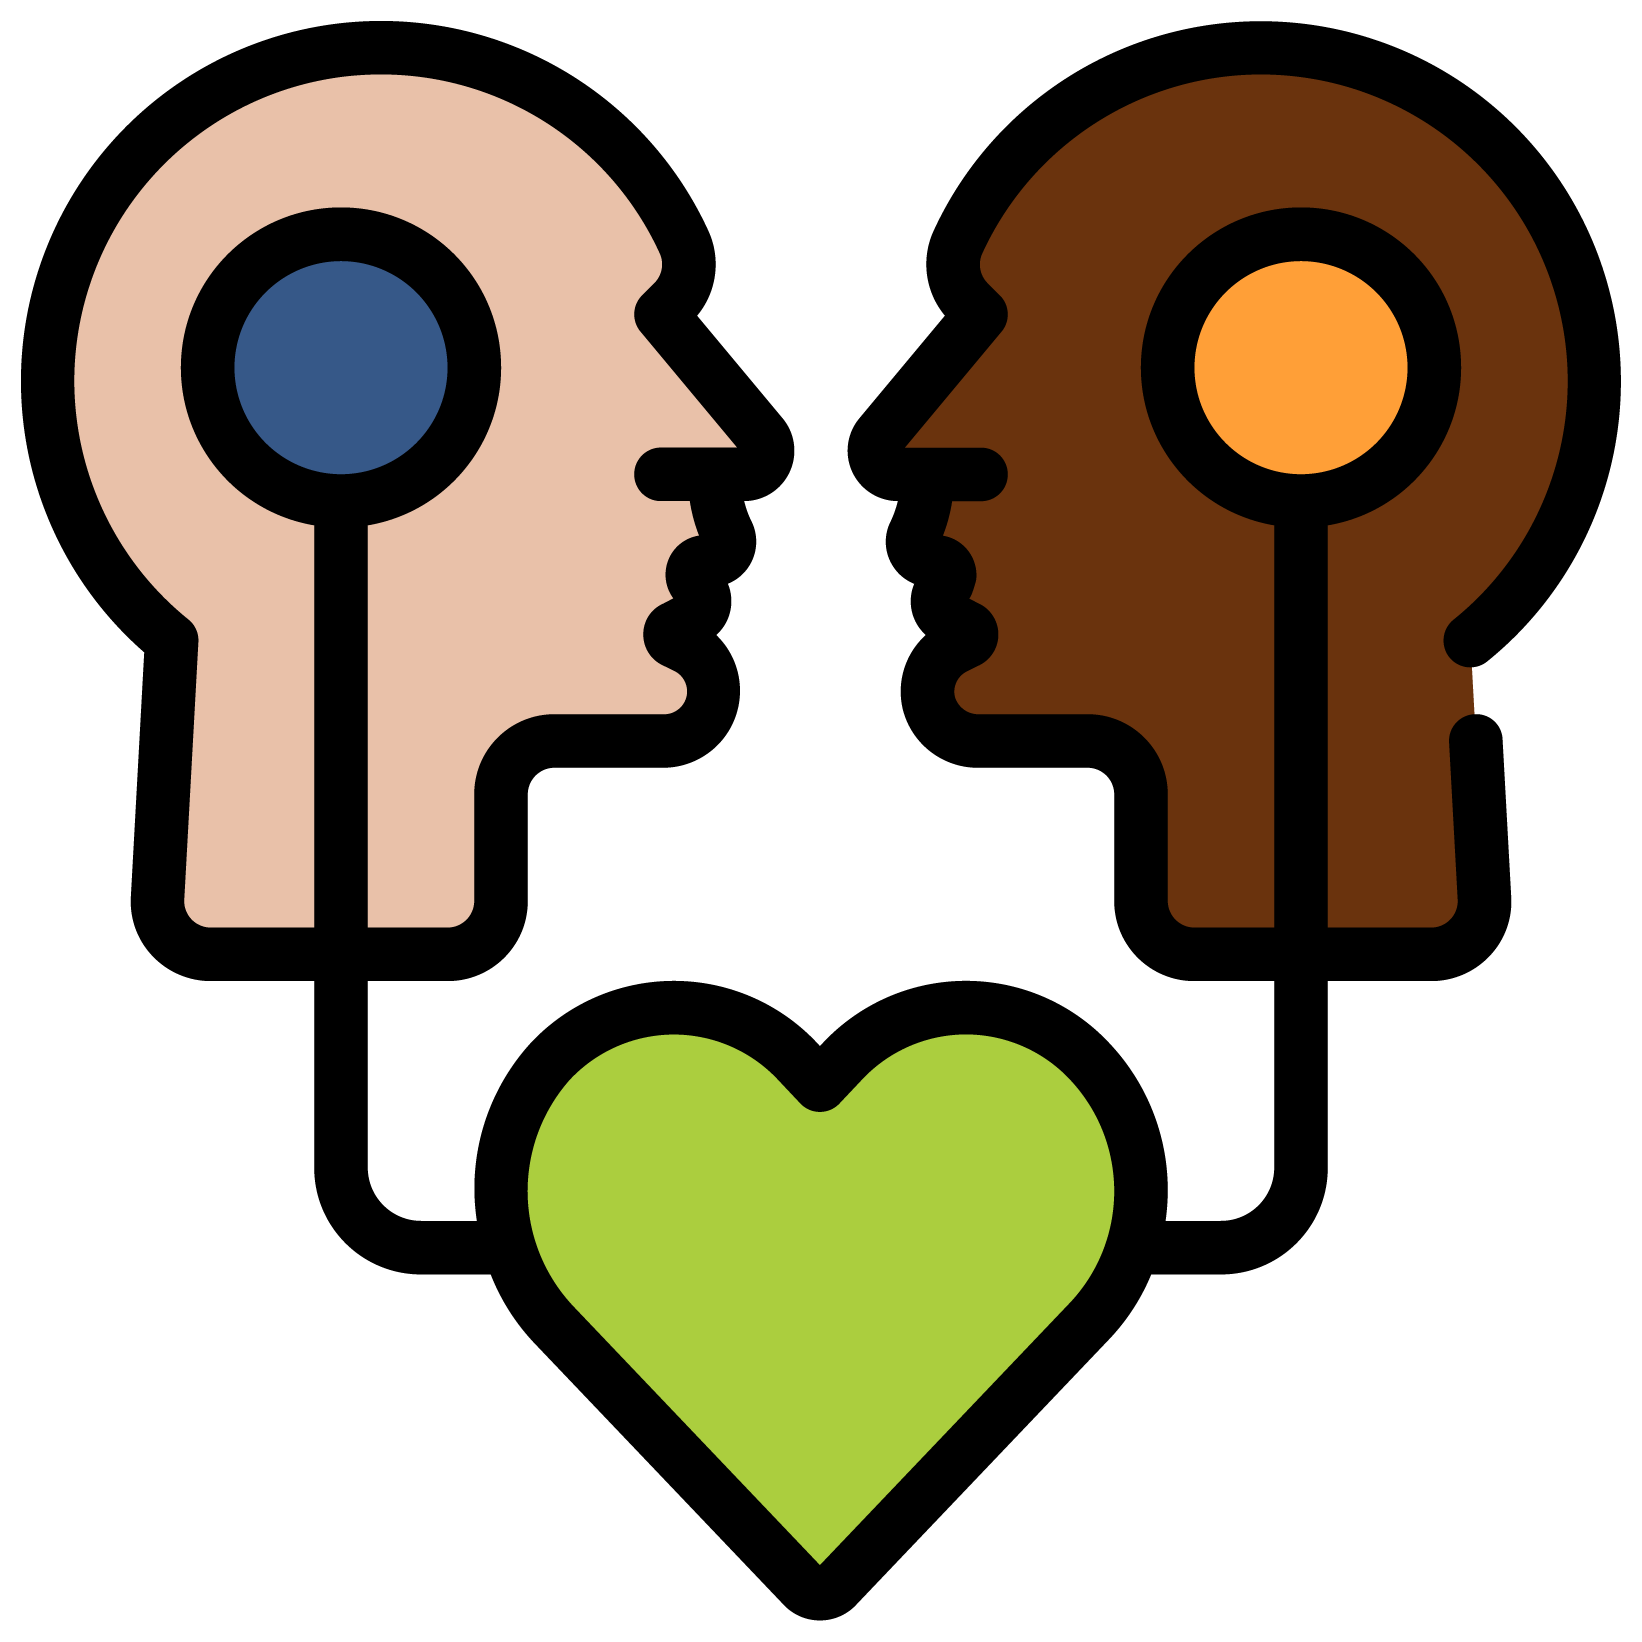 icon with two heads, one white and one black, connected by a line to a green heart in the middle